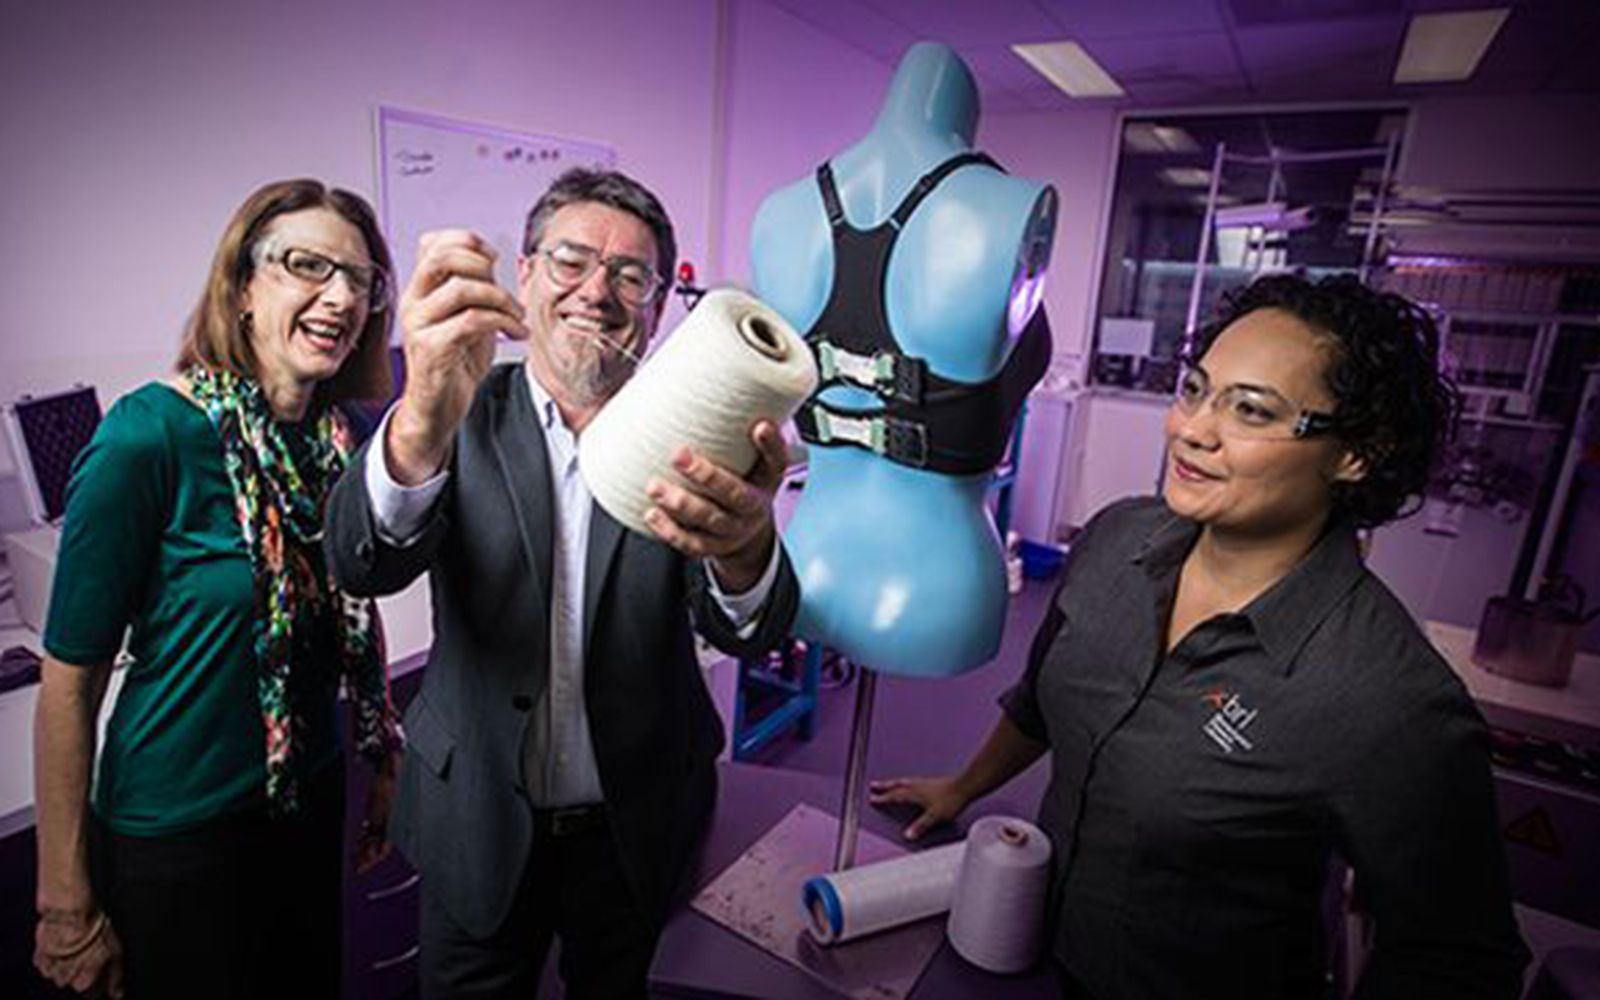  gadgets supporting humans has been taken literally for the bionic bra image 1